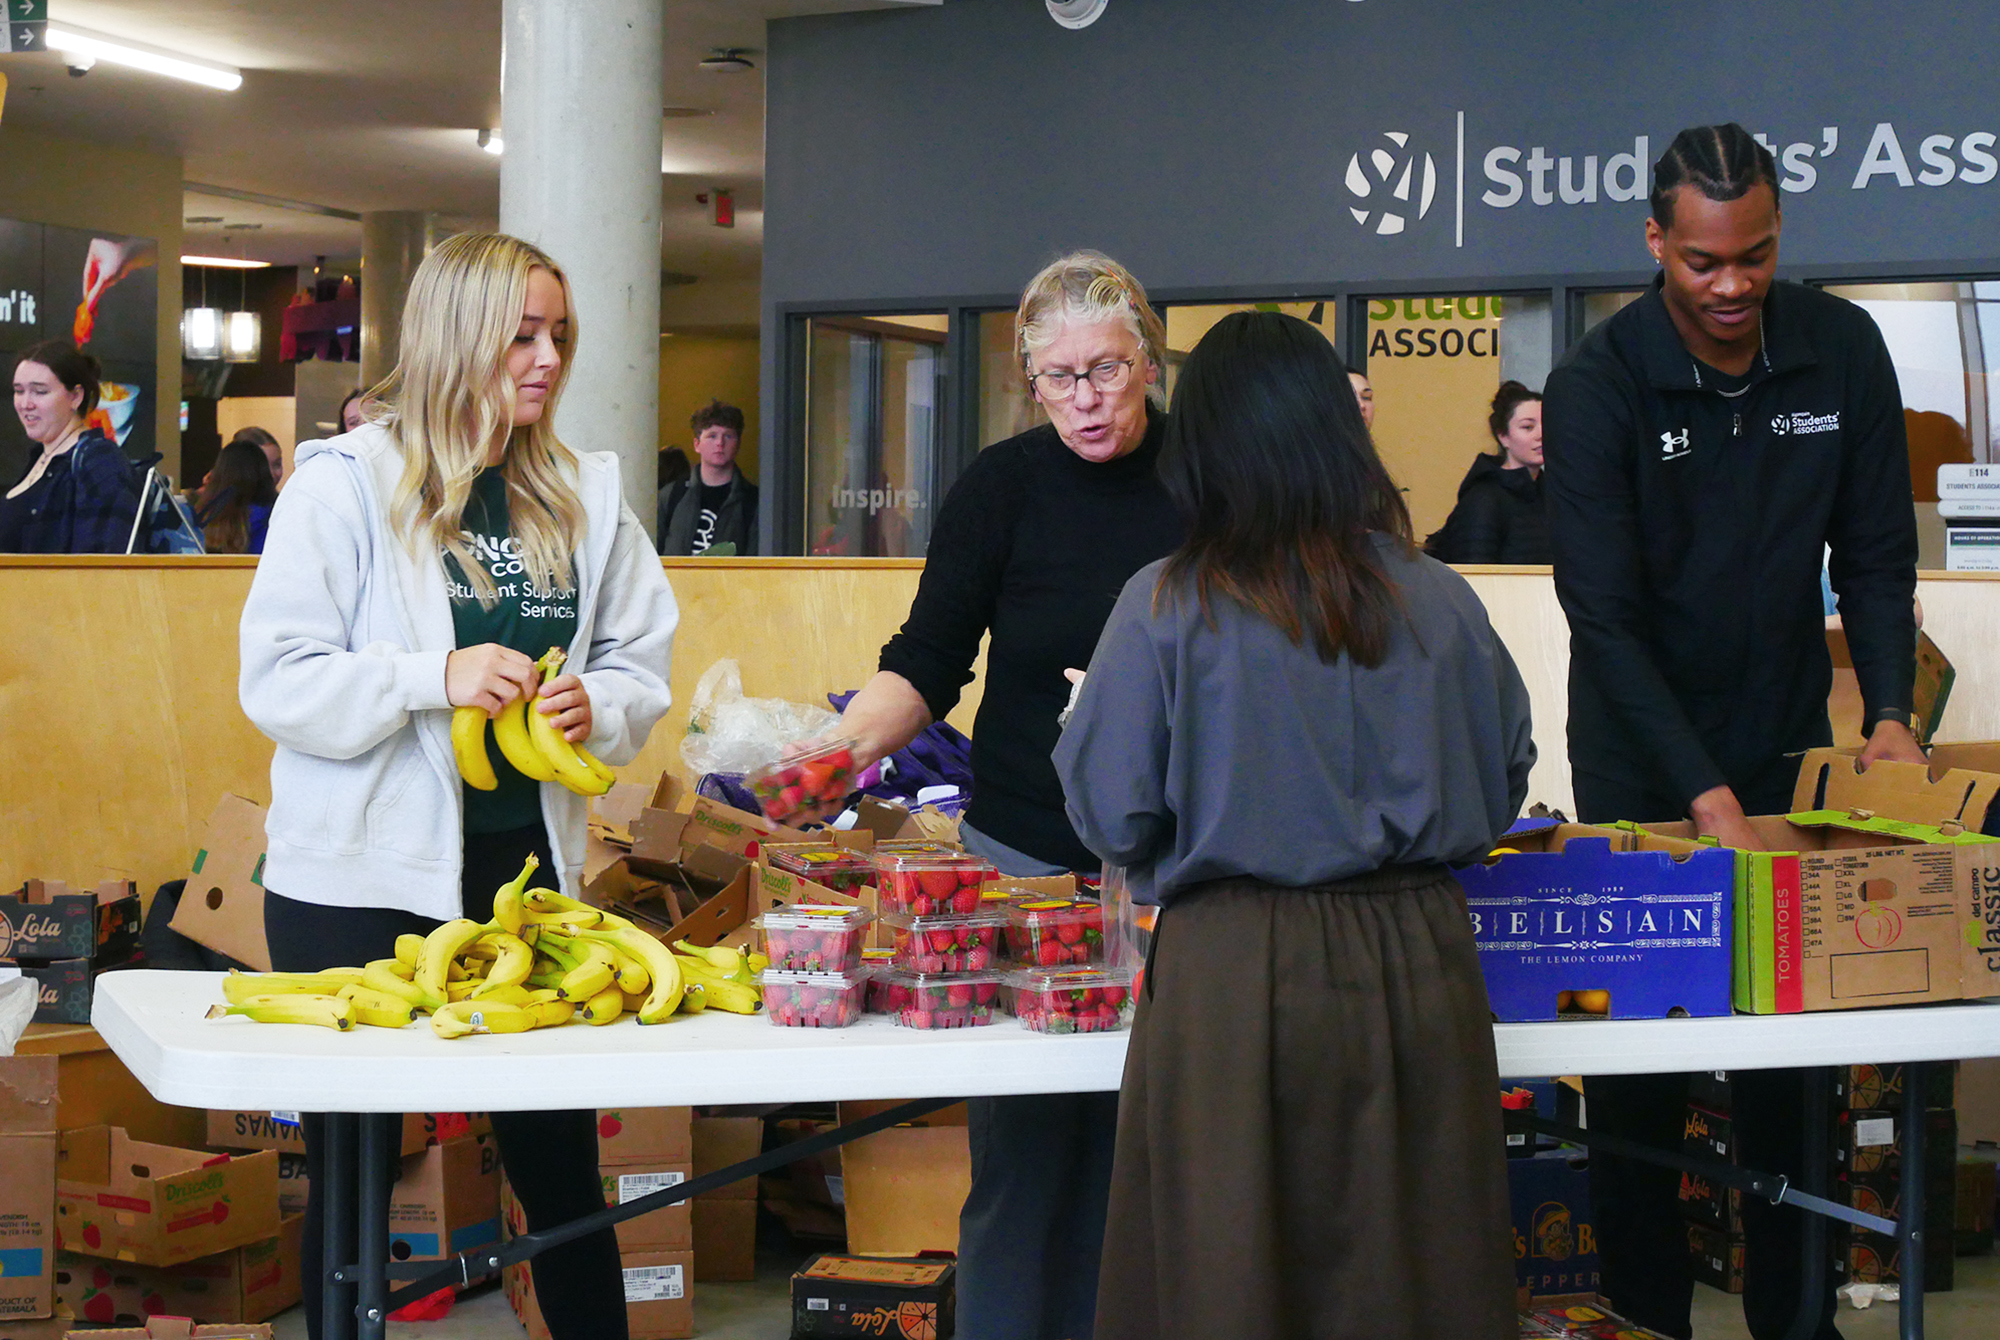 Starr Brommell (left), a business marketing student, Wilma Overbeek (middle) and Matteo Mongroo (right) giving food to the community.